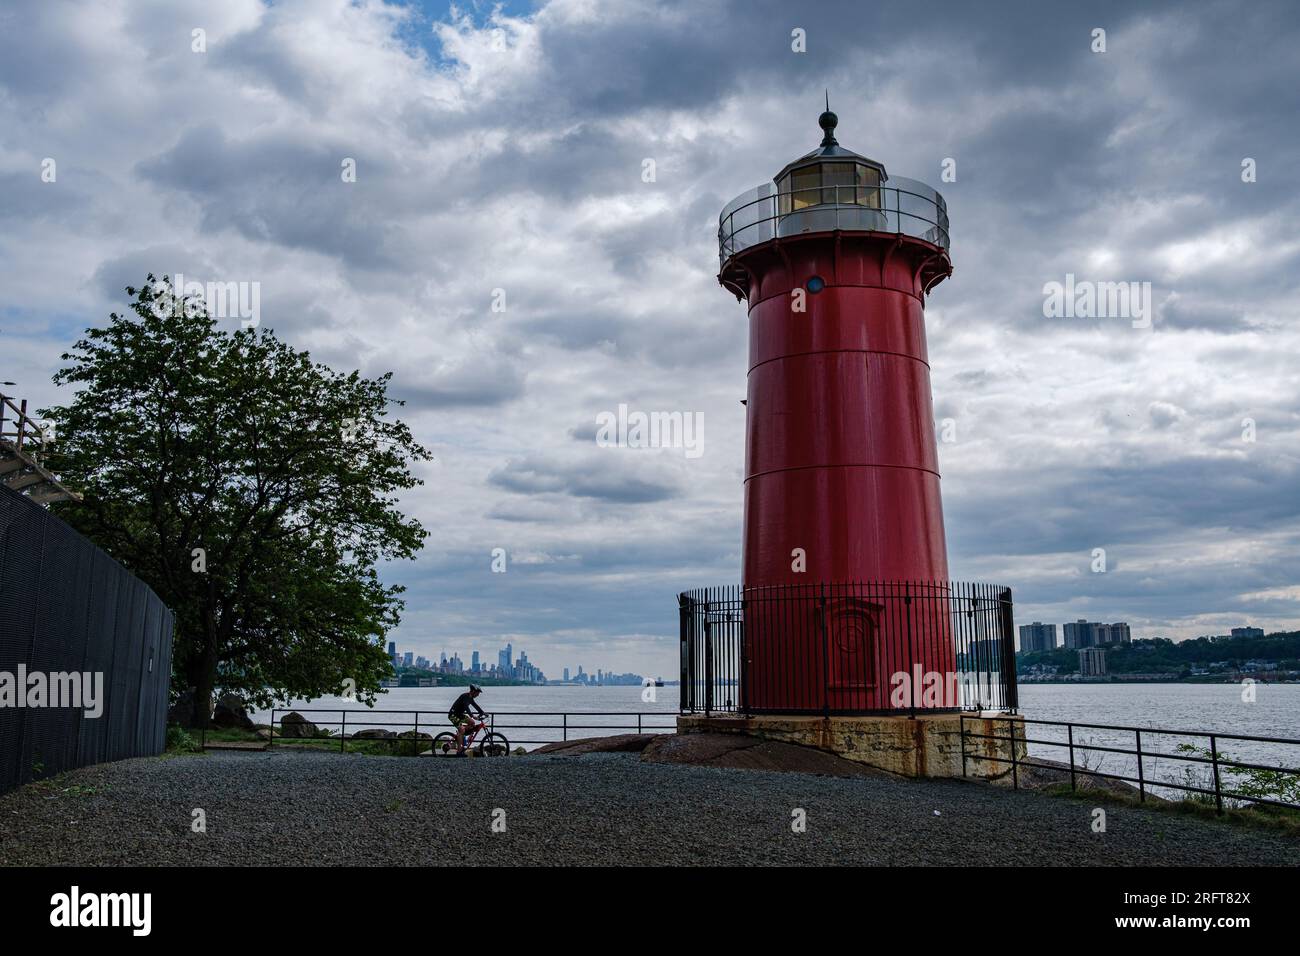 Cyclist's serene moment at Fort Washington Park, gazing upon Manhattan's skyline. A vibrant urban escape on a cloudy day. Stock Photo